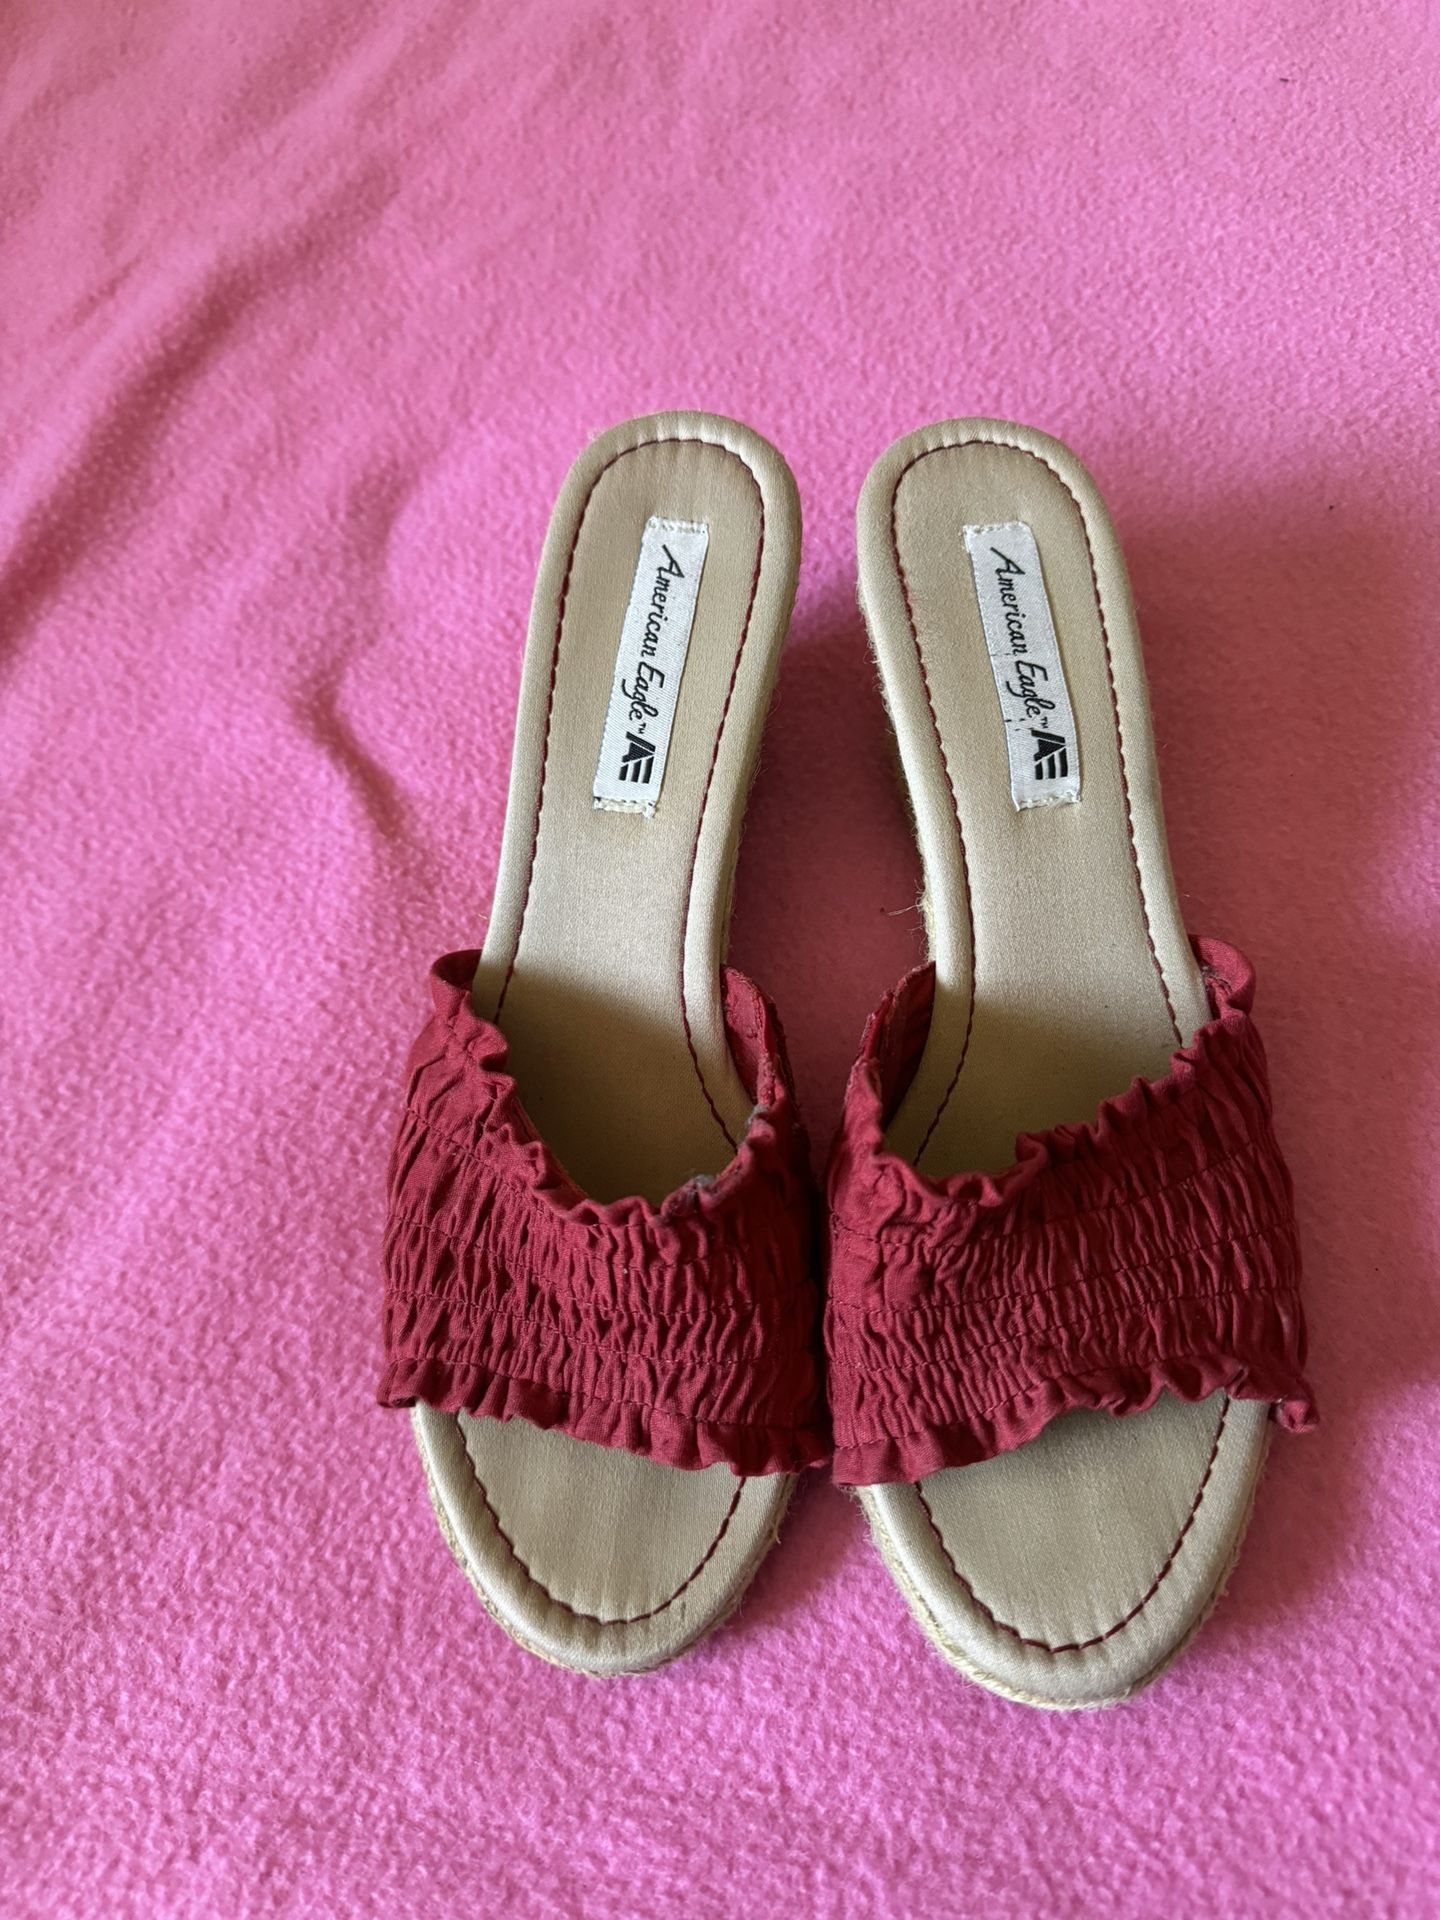 American Eagle Outfitters Red Wedges 